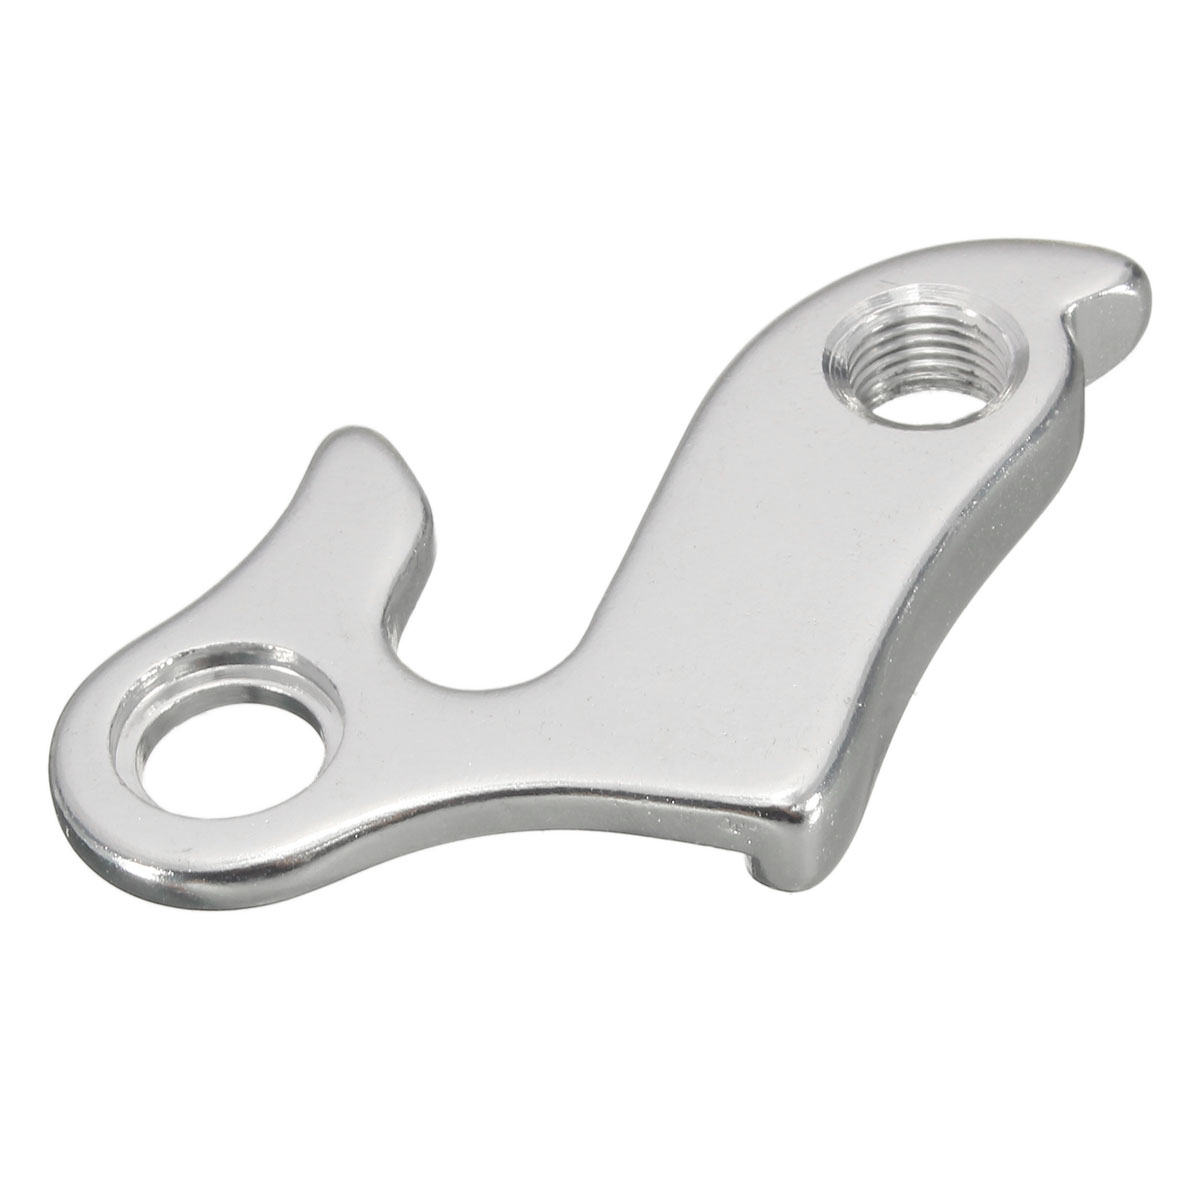 MTB-Bicycle-Frame-Rear-Derailleur-Mech-Hanger-Dropout-With-Nuts-Silver-Type-1014742